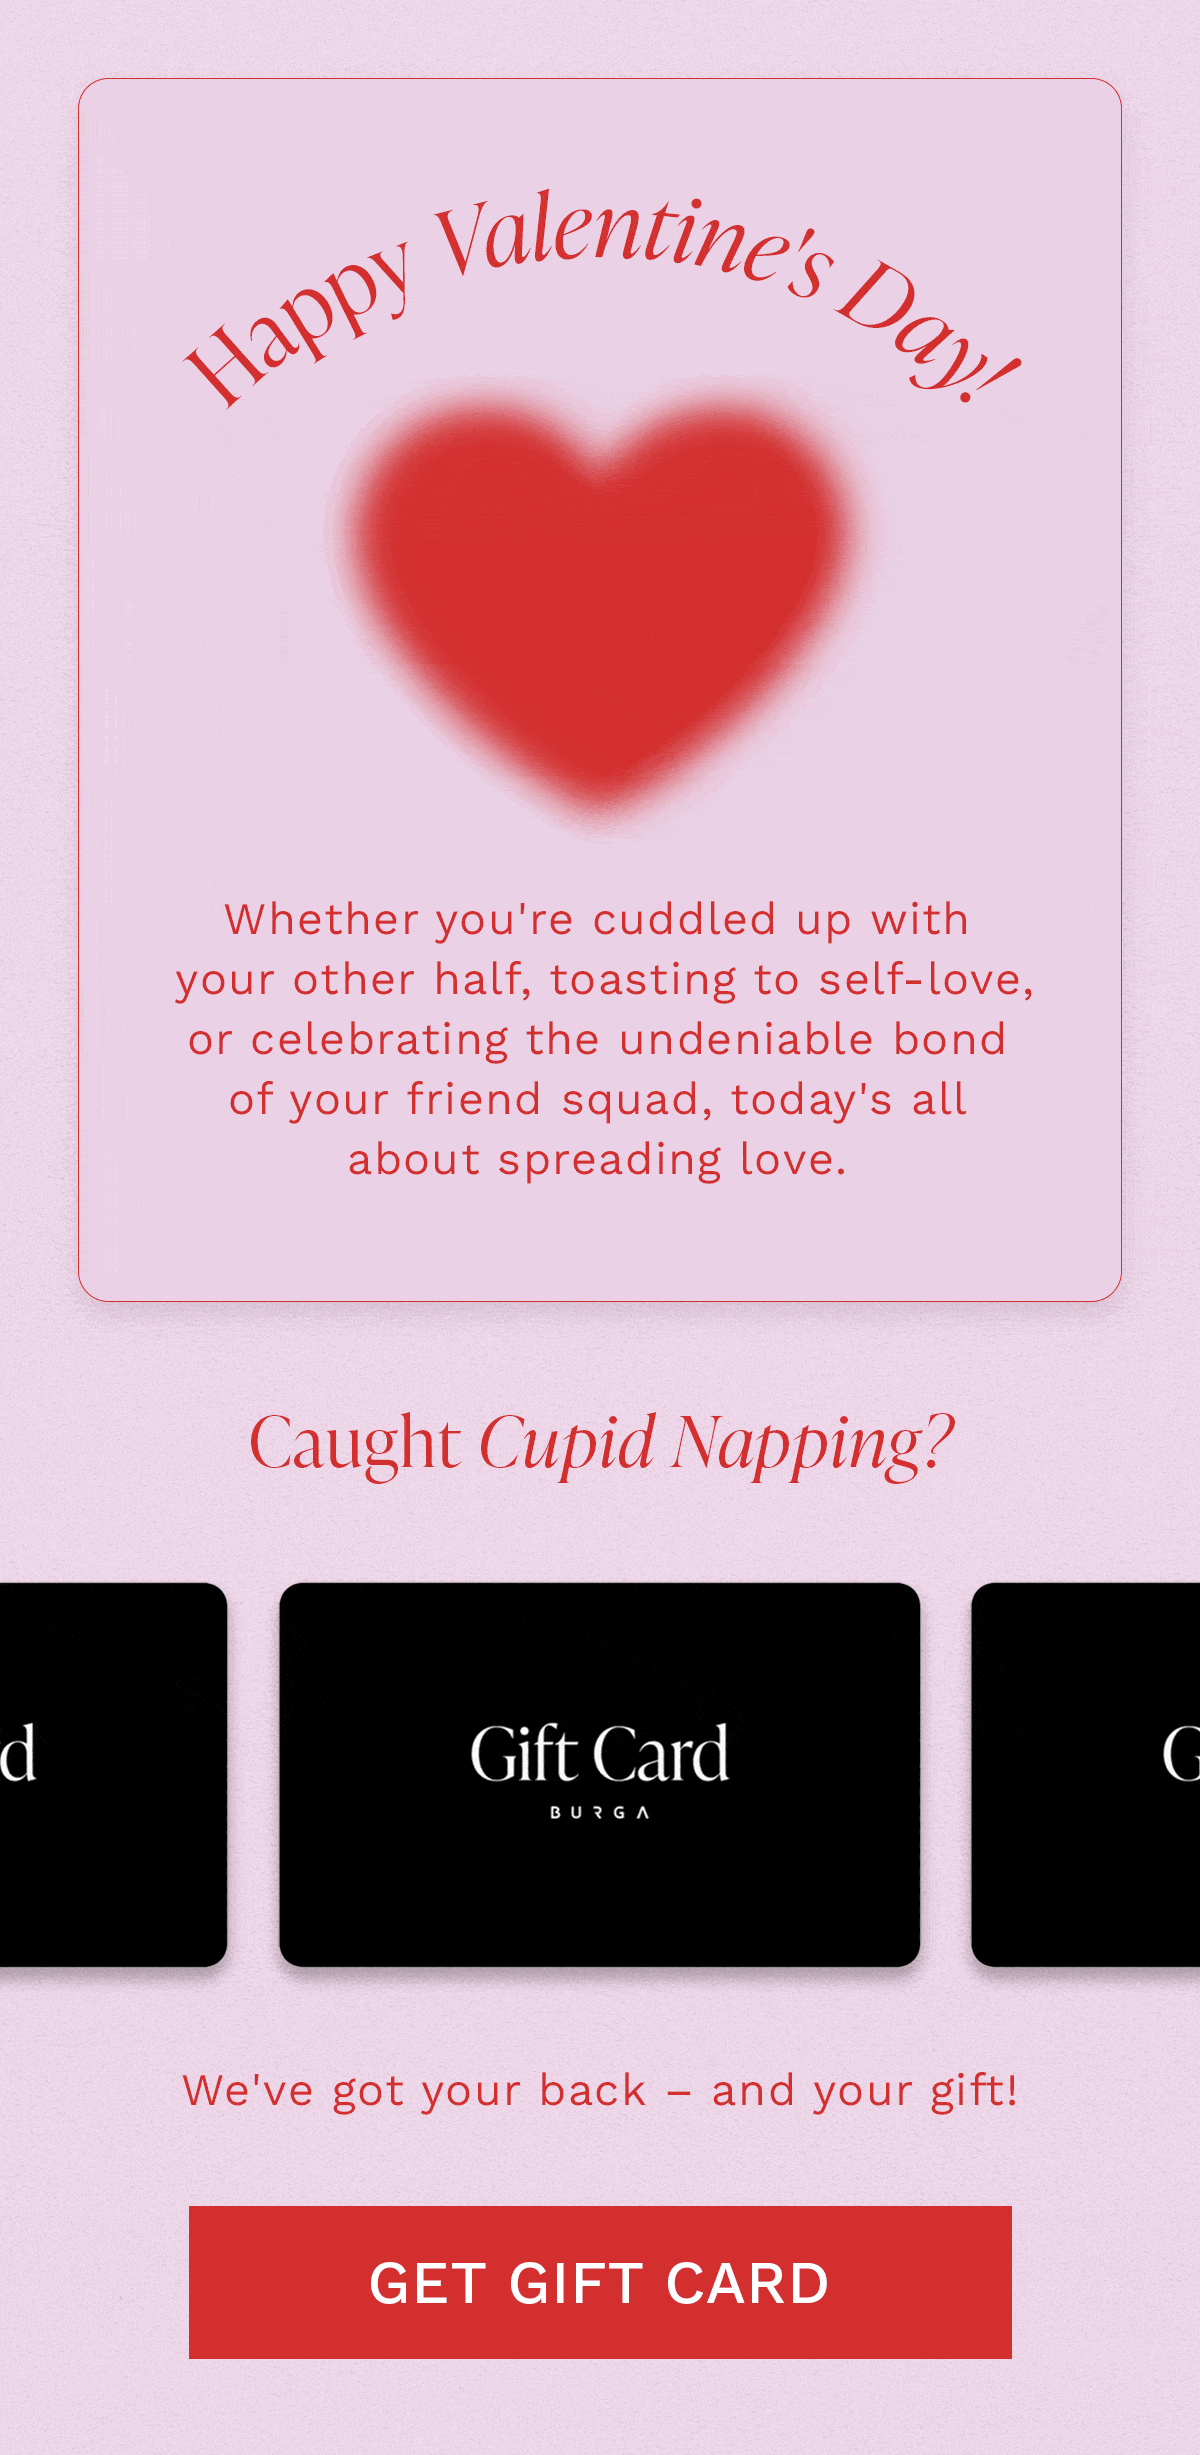 Happy Valentine's Day! Whether you're cuddled up with your other half, toasting to self-love, or celebrating the undeniable bond of your friend squad, today's all about spreading love. Caught Cupid Napping? We've got your back – and your gift! [GET GIFT CARD]